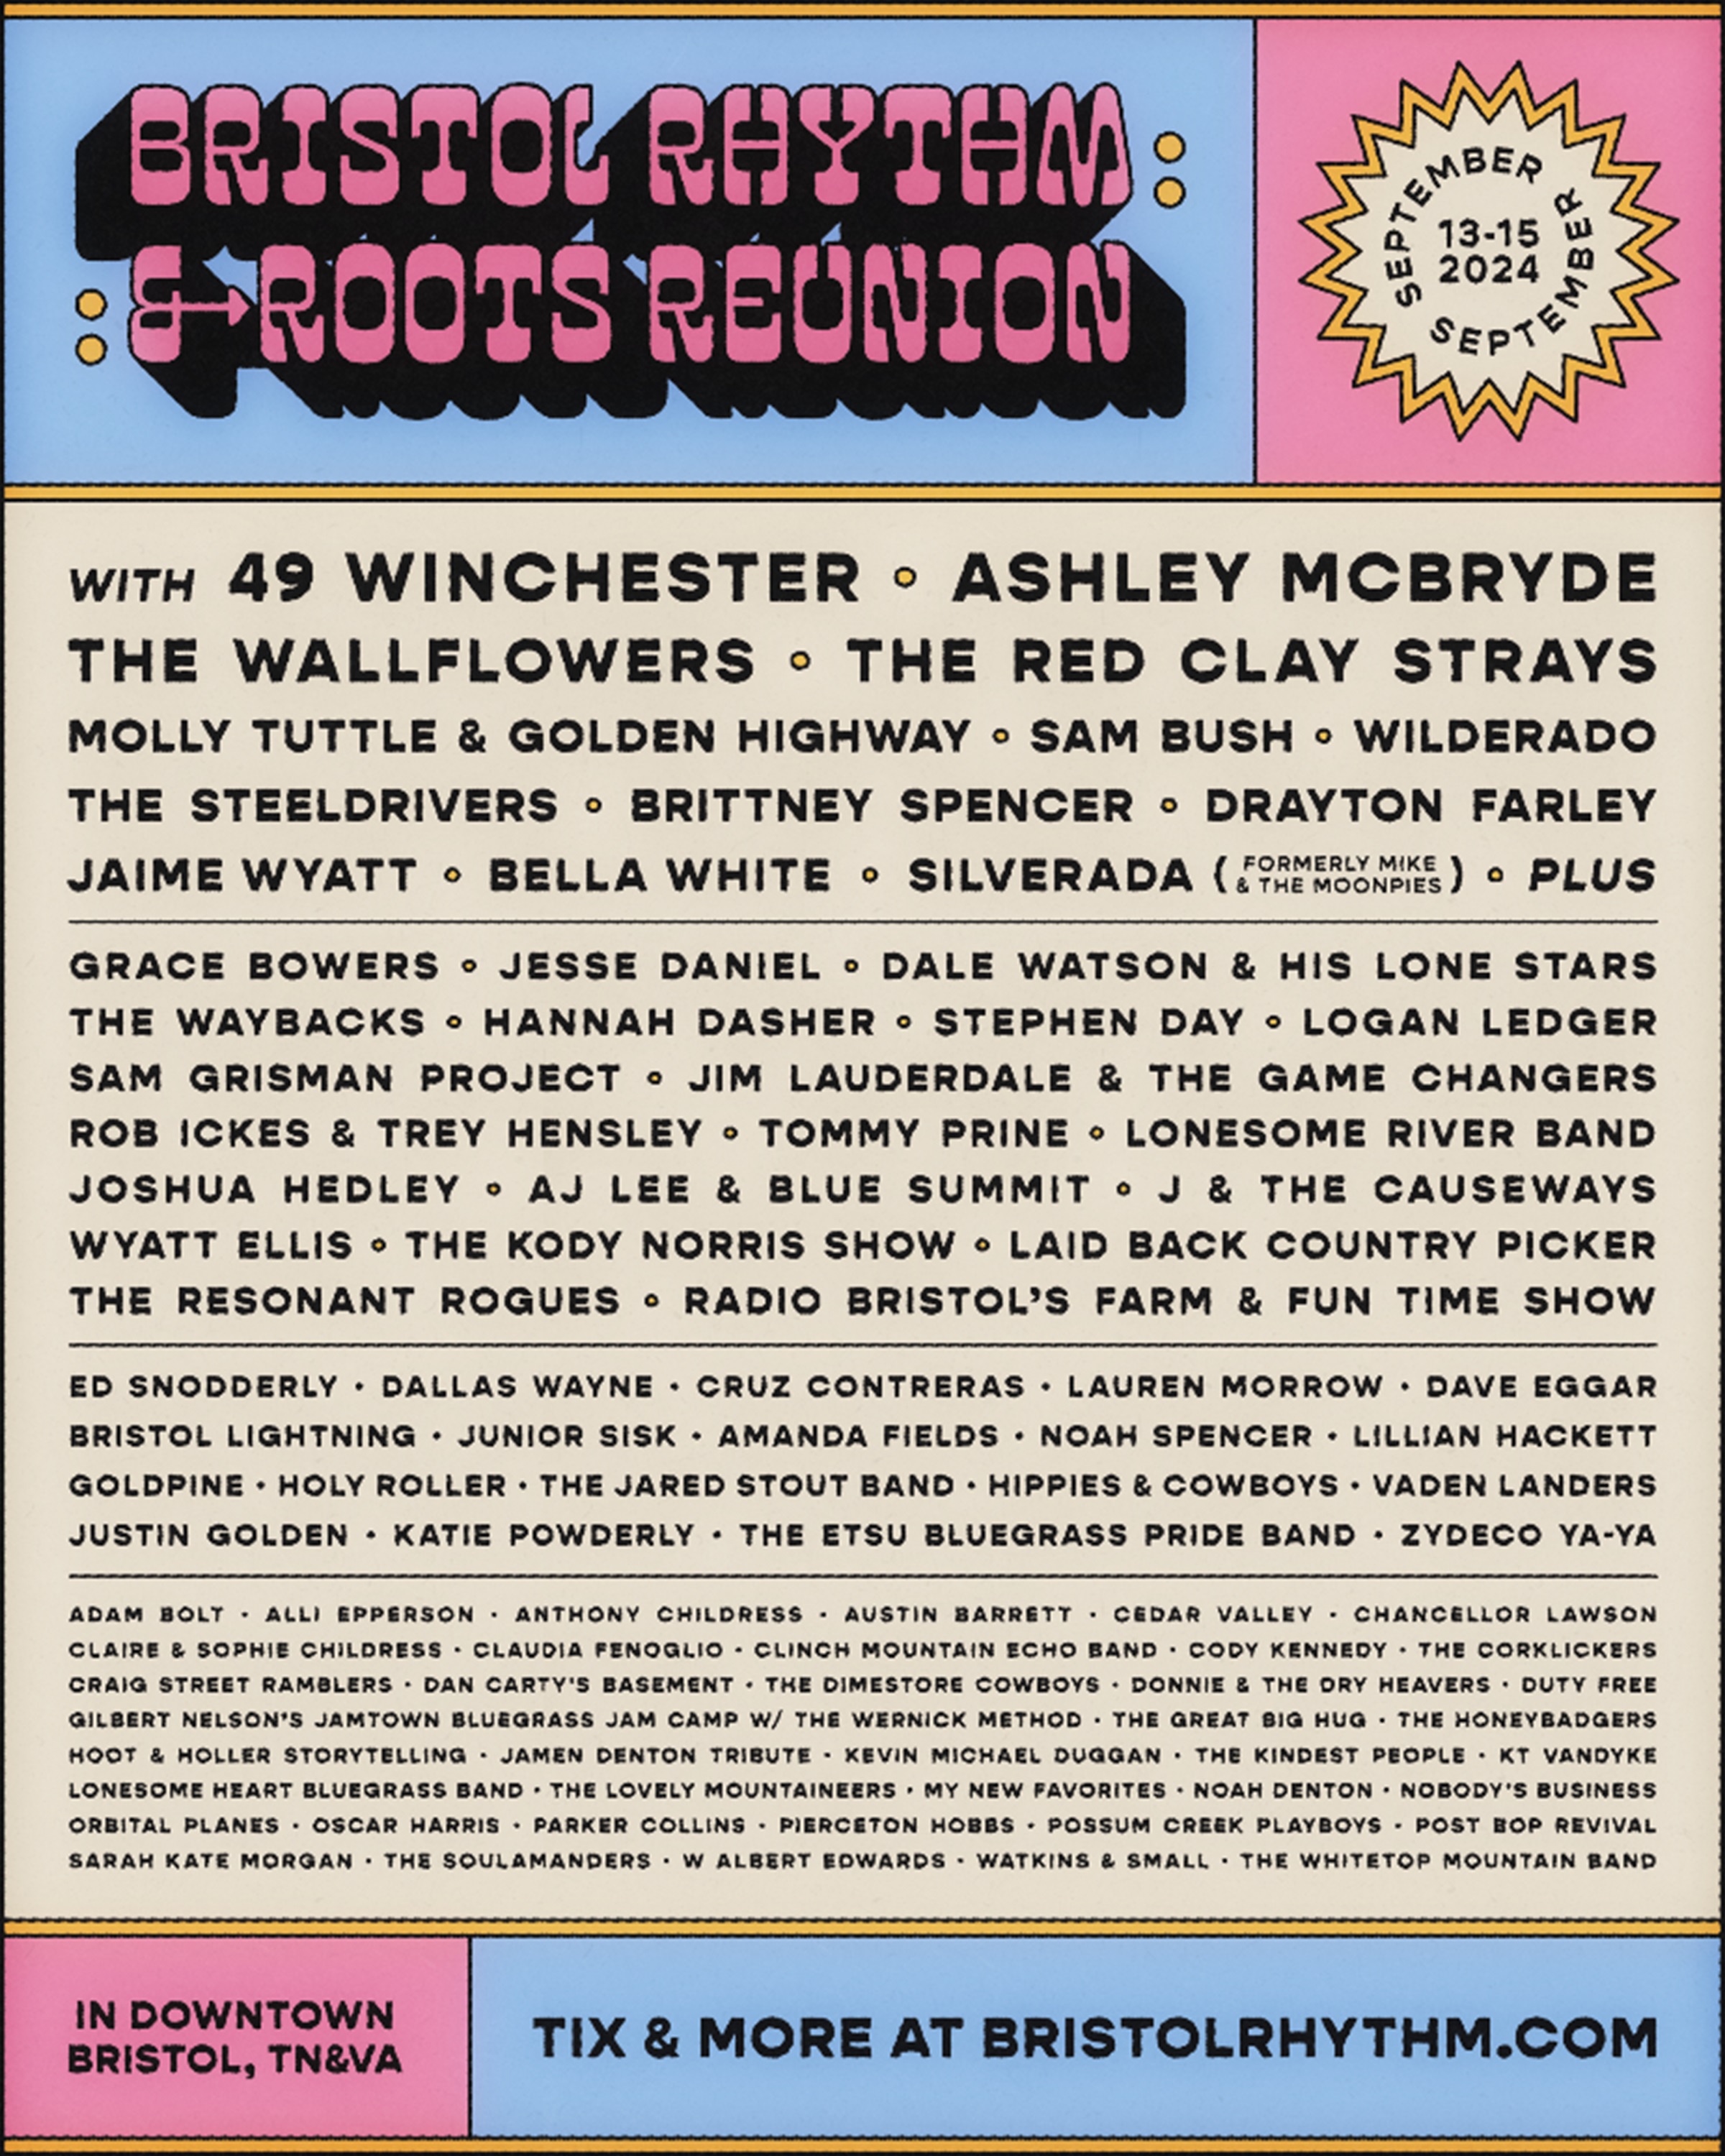 Full Bristol Rhythm & Roots Reunion 2024 Lineup Released